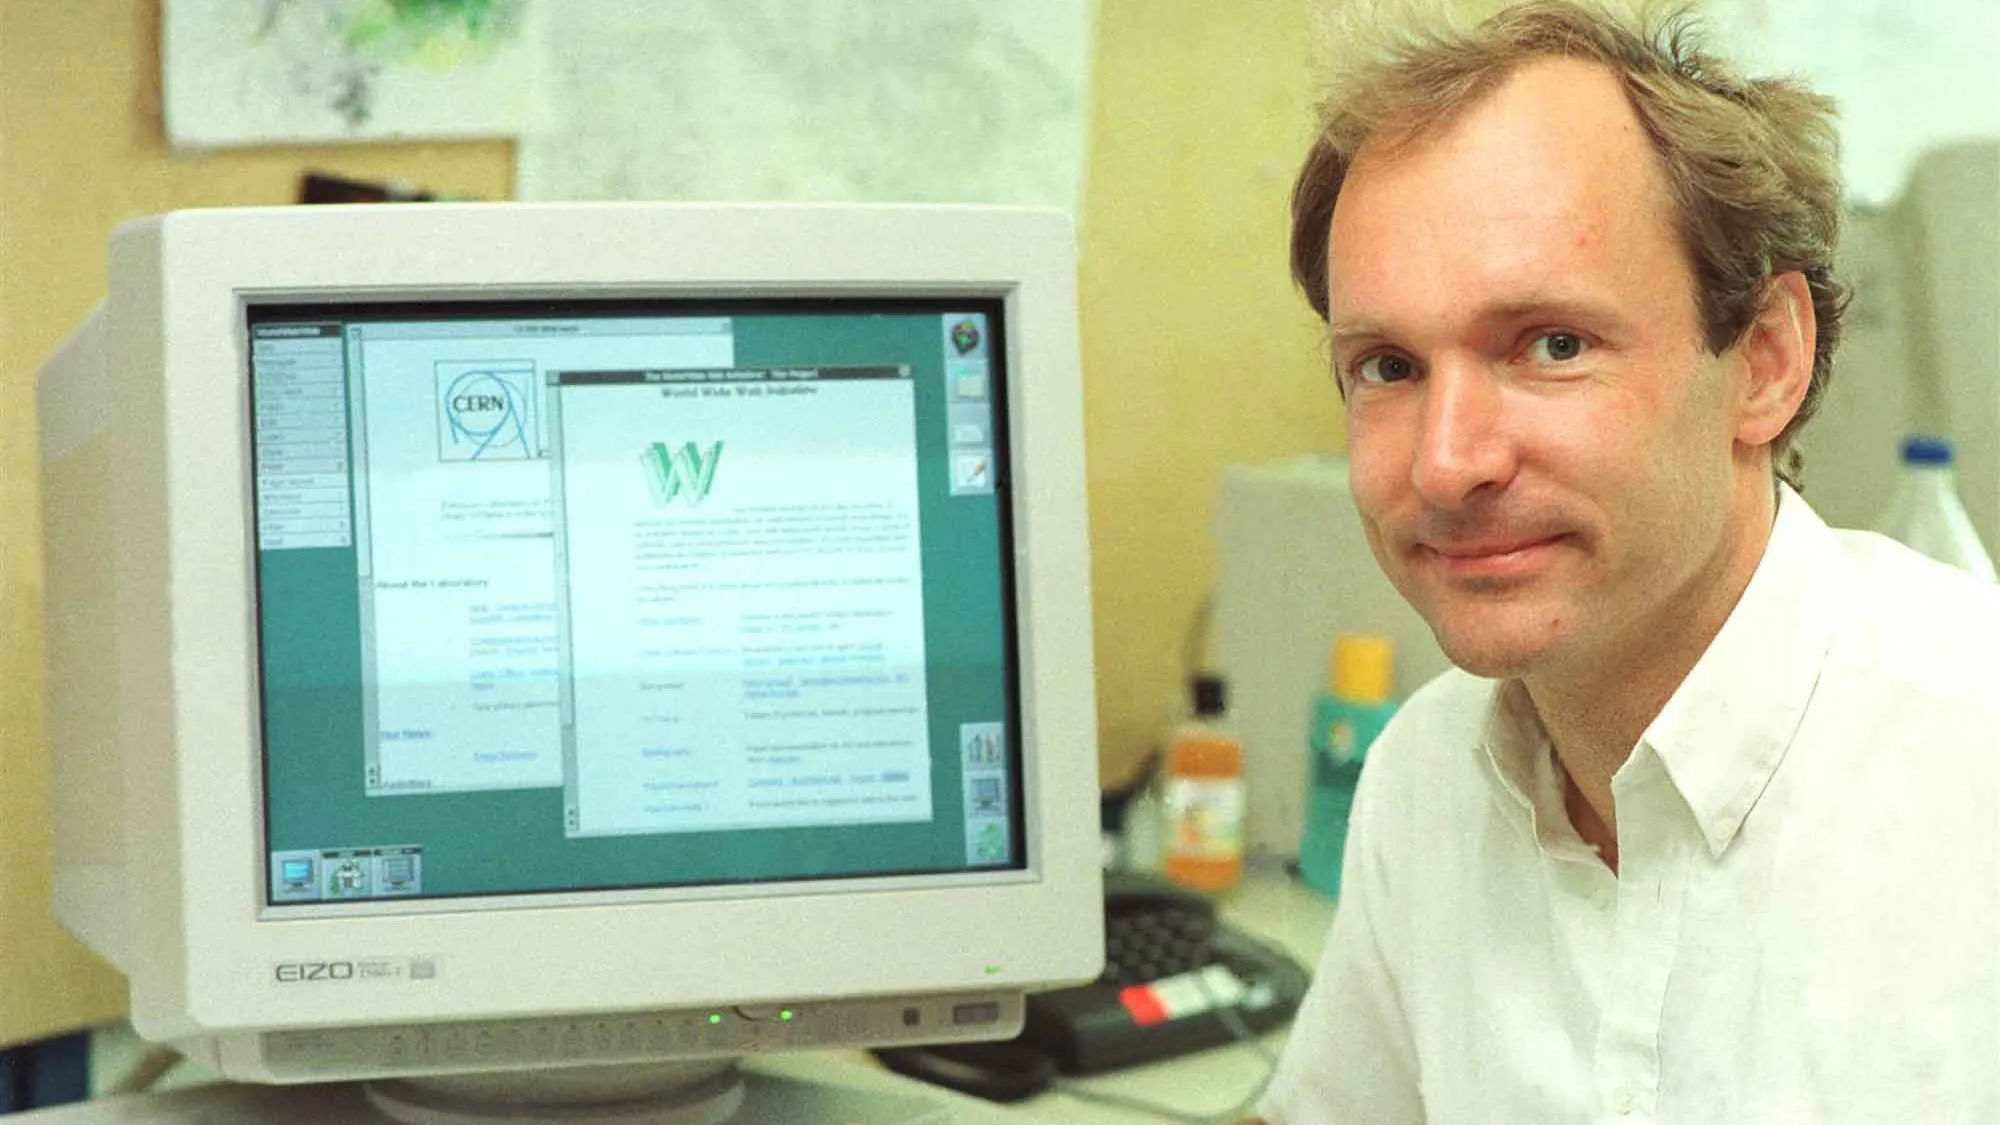 1989-1991 — Sir Tim Berners-Lee invented the World Wide Web